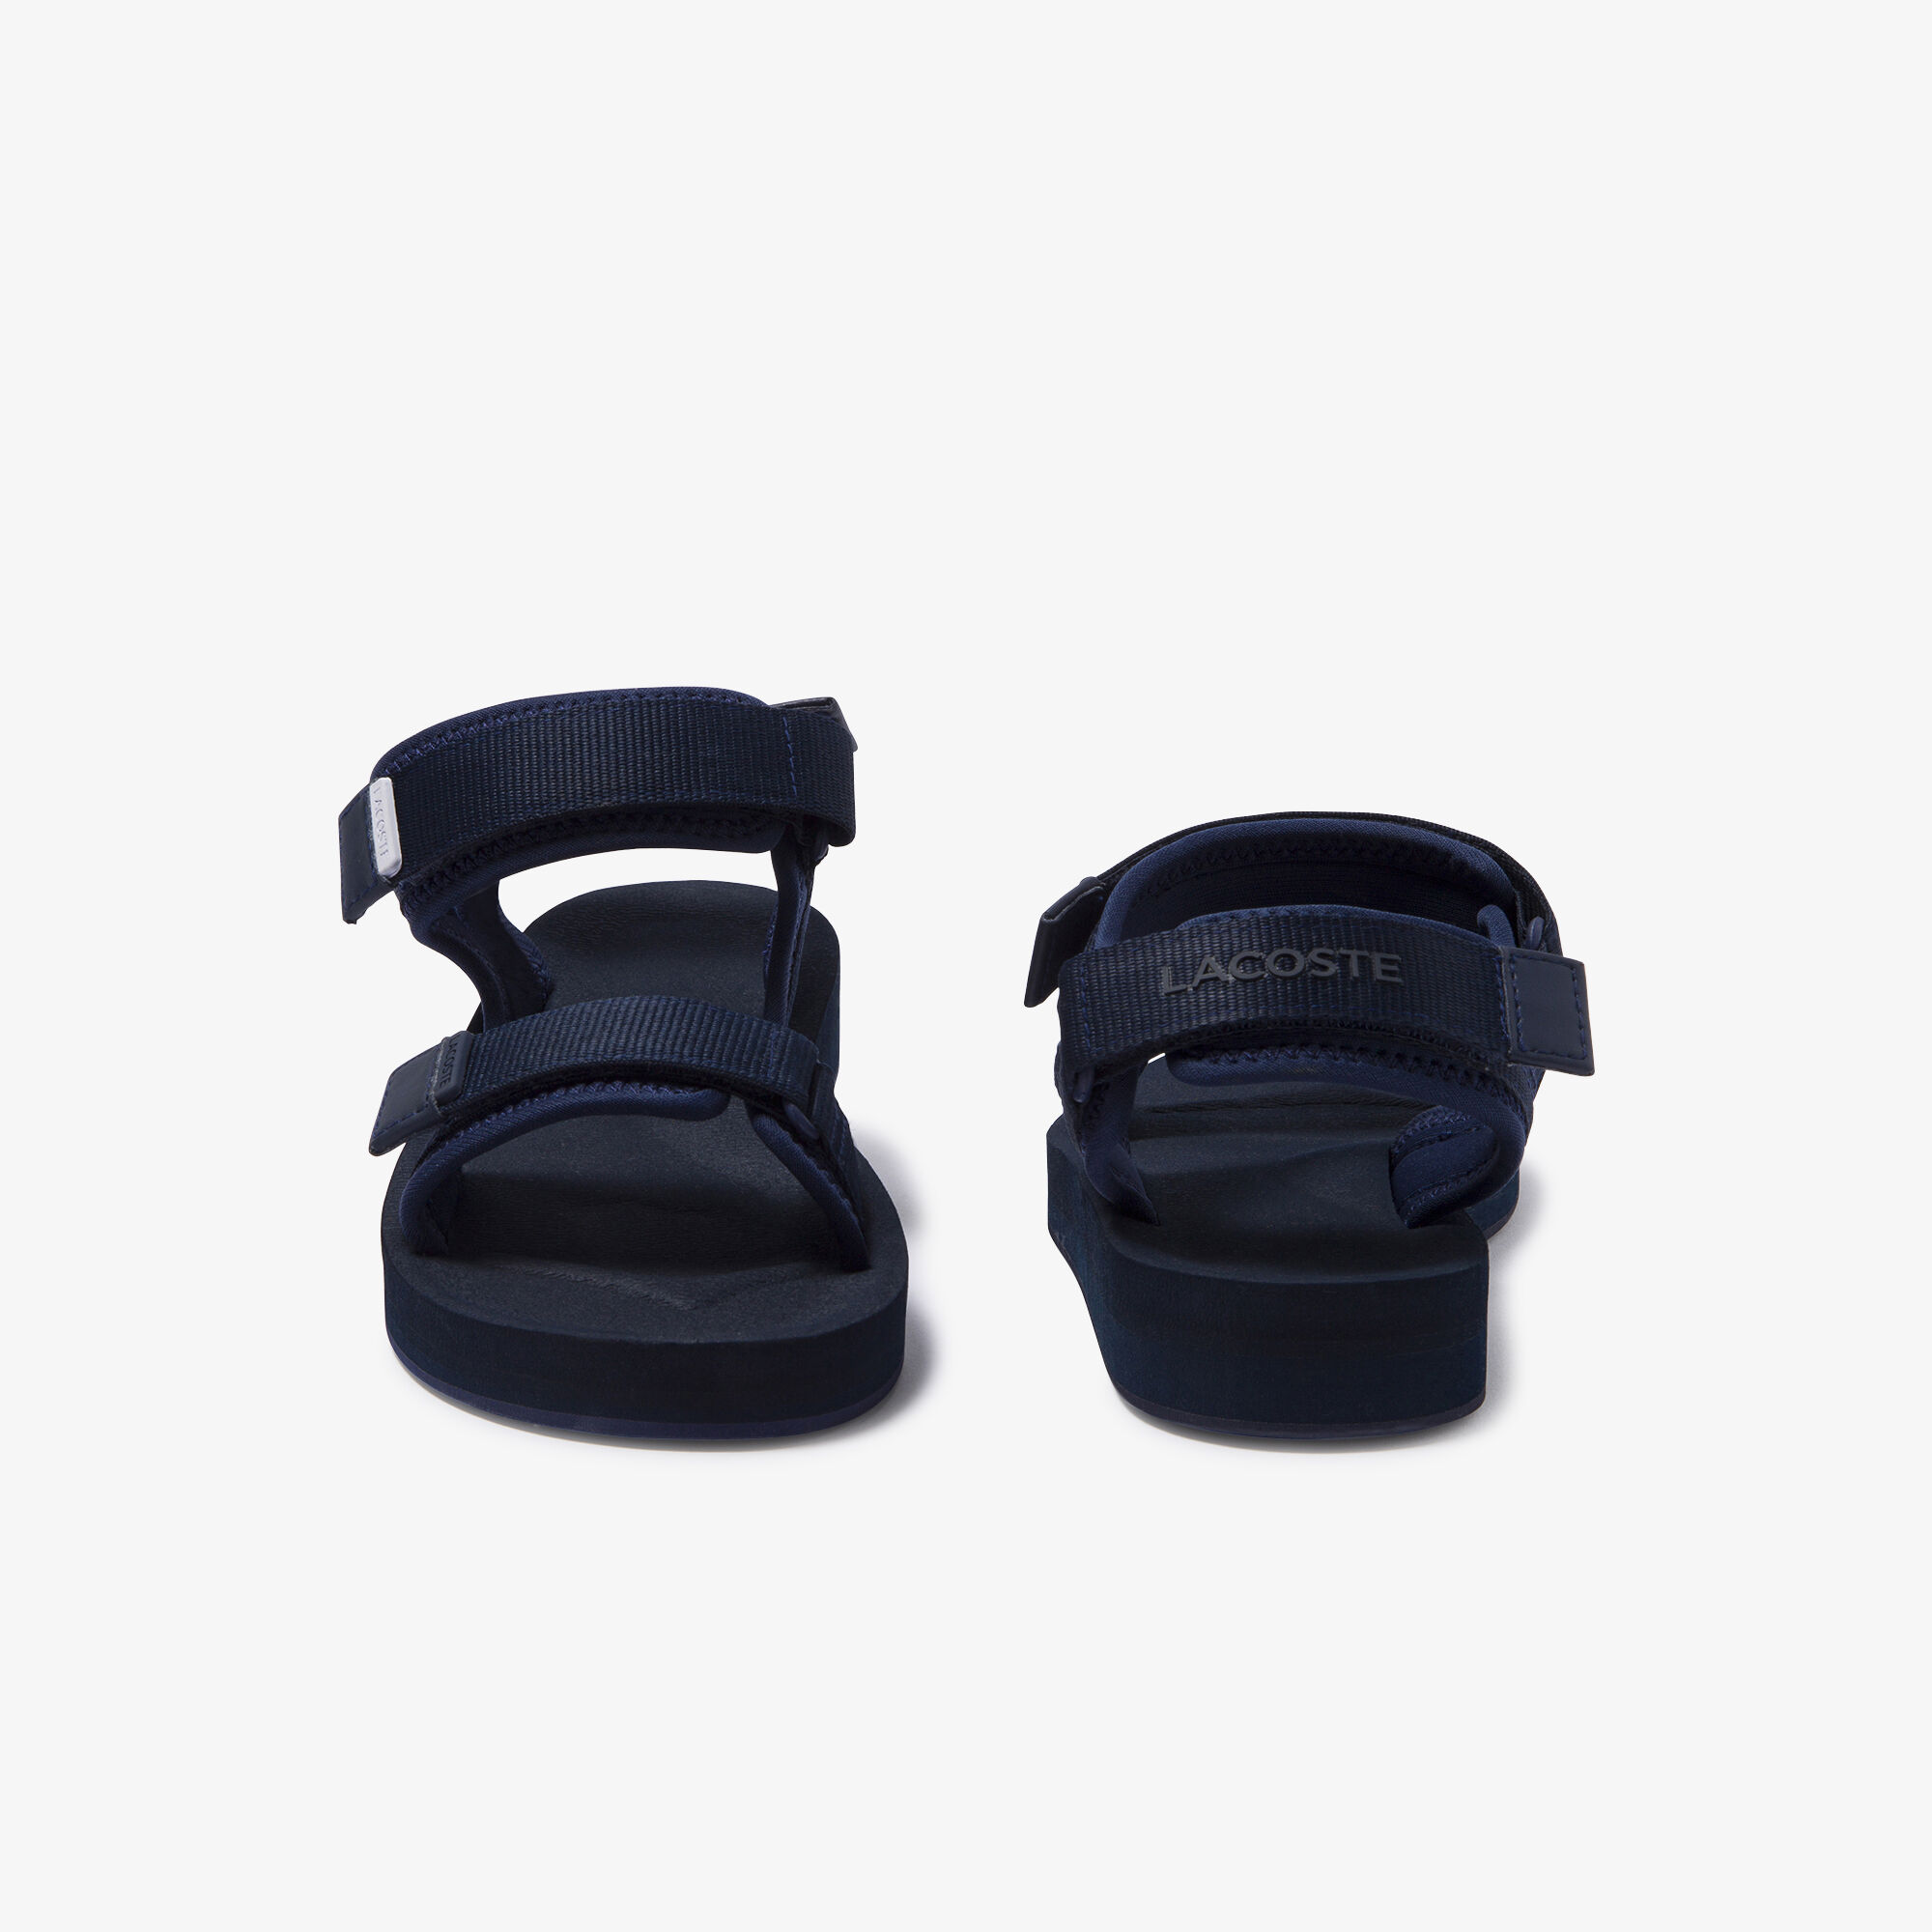 Women's Suruga Textile and Synthetic Sandals